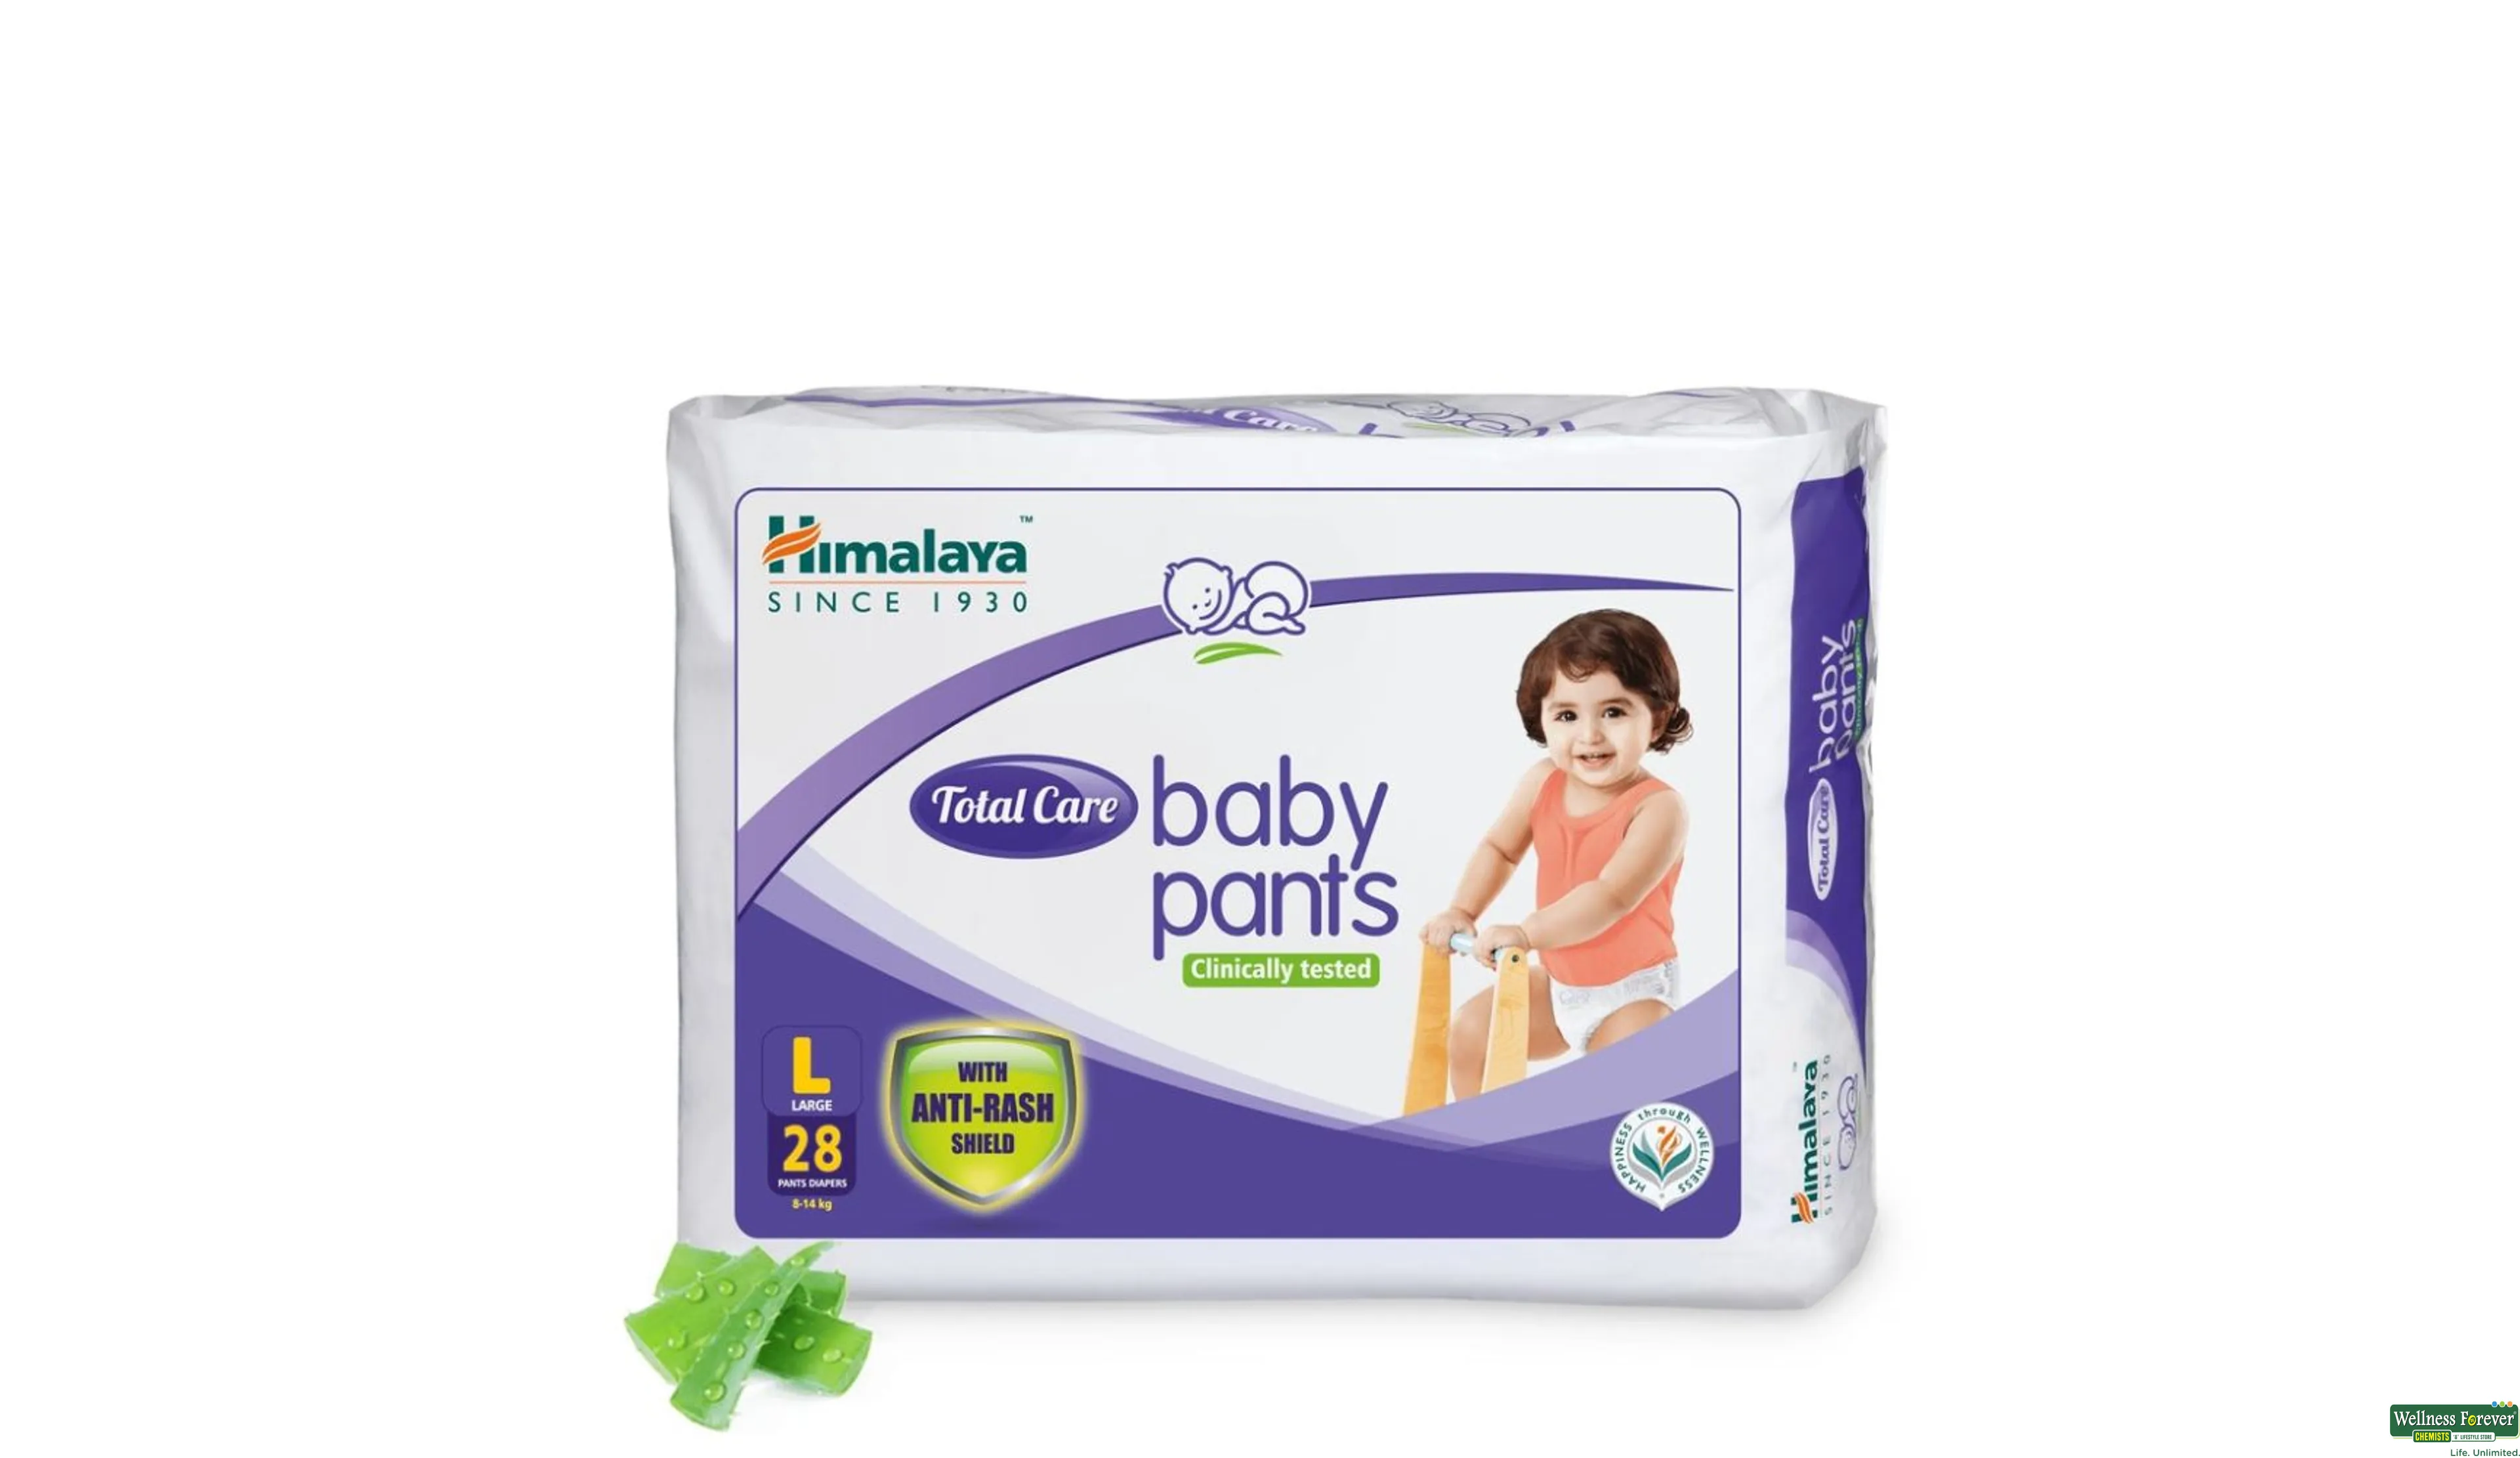 Buy Himalaya Total Care Extra Large Size Baby Diaper Pants (54 Count) &  Himalaya Gentle Baby Soap (4N*75g) Online at Low Prices in India - Amazon.in